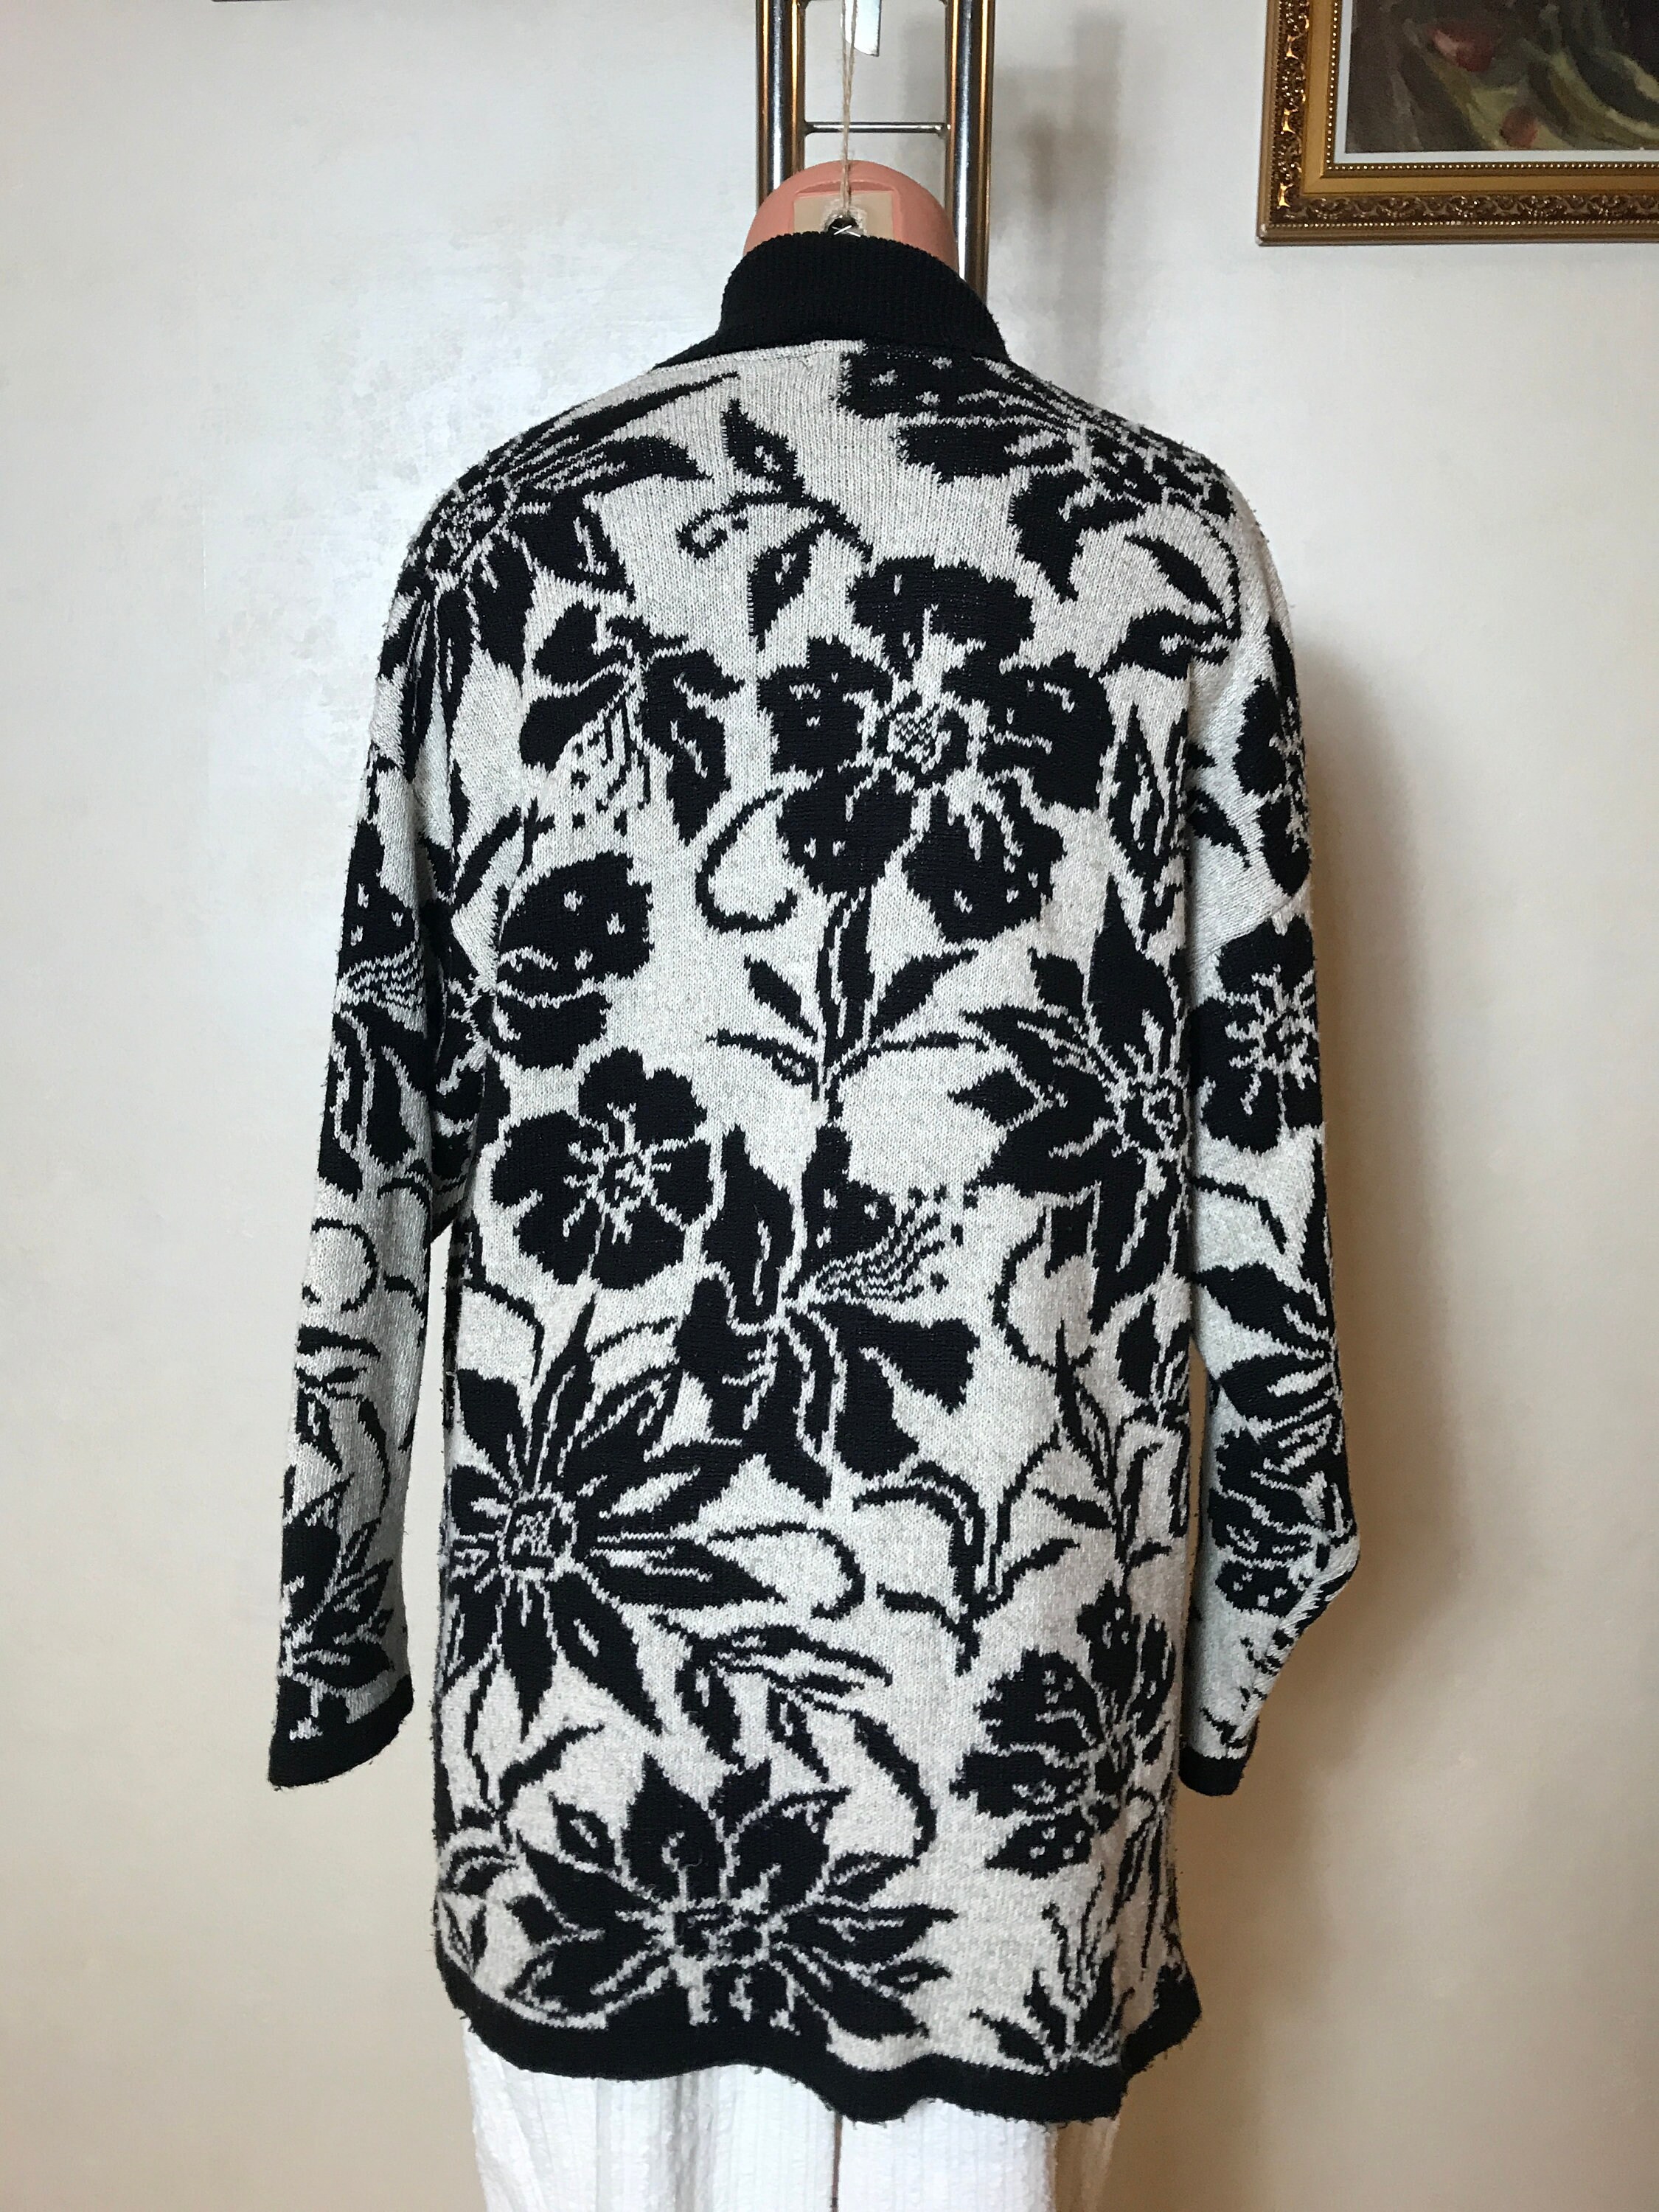 Vintage Womans Cardigan Black an White Floral Print Knitted - Etsy